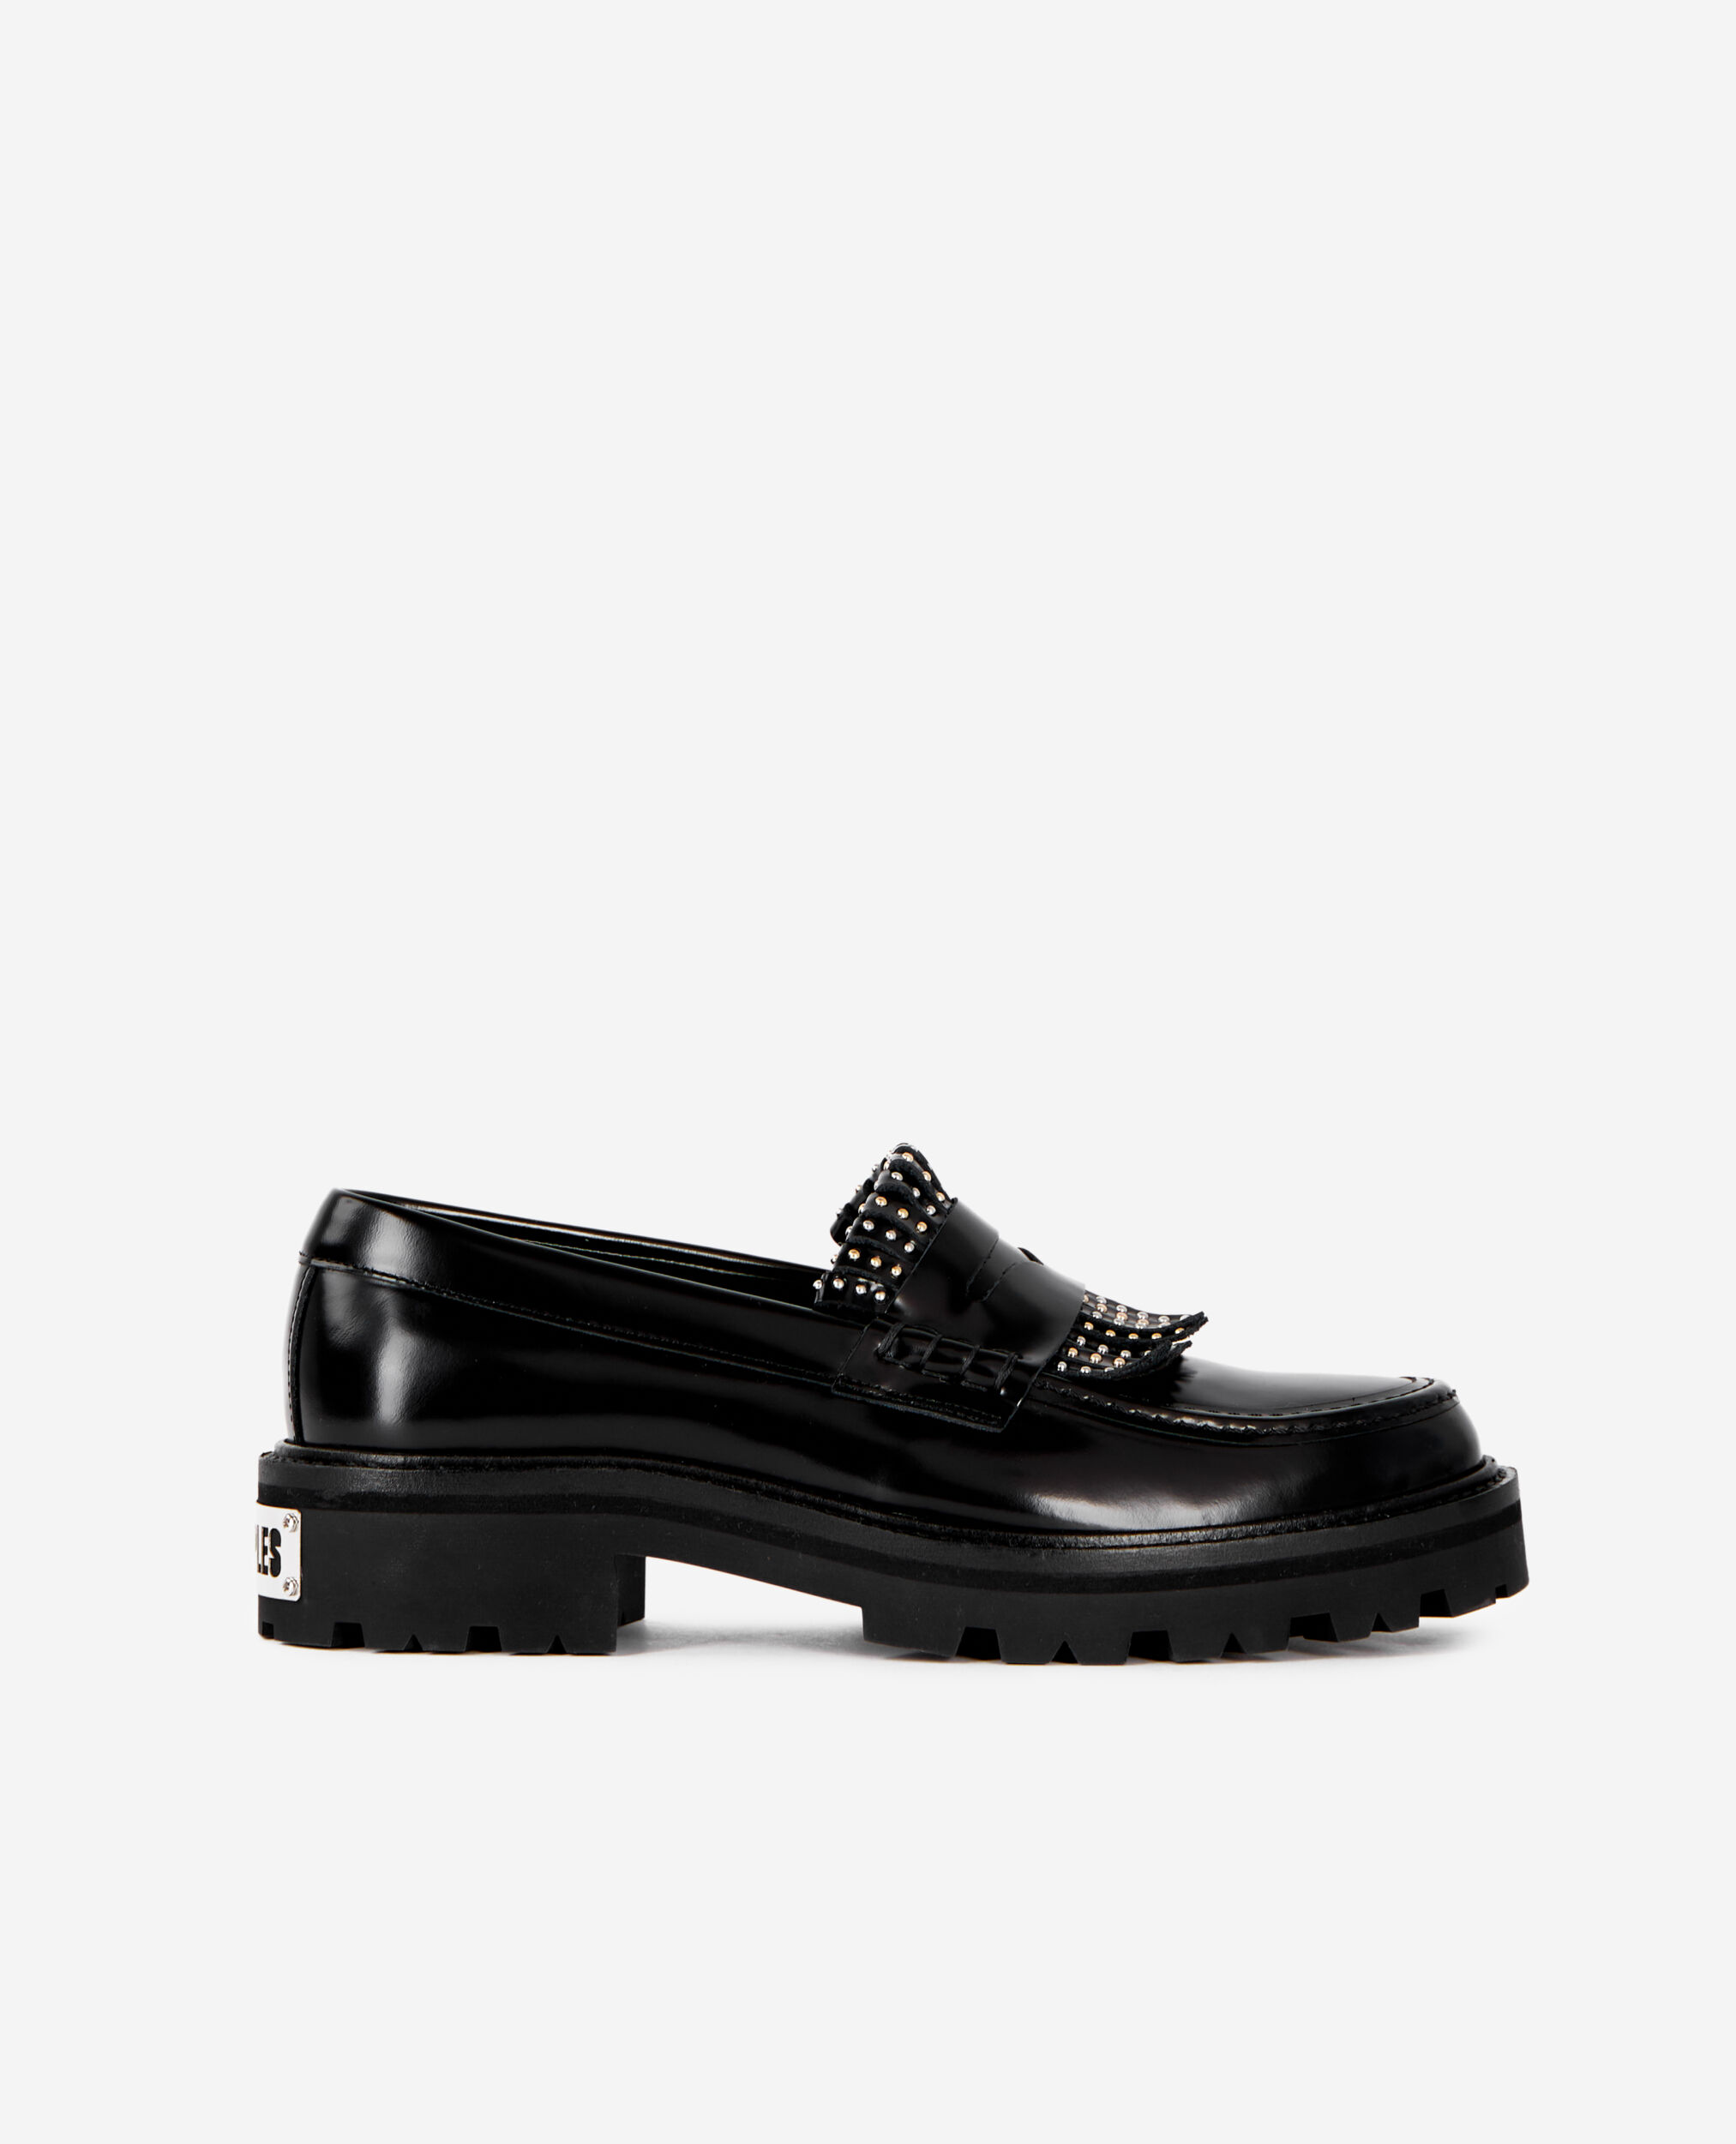 Penny loafers in black leather with fringes and studs, BLACK, hi-res image number null